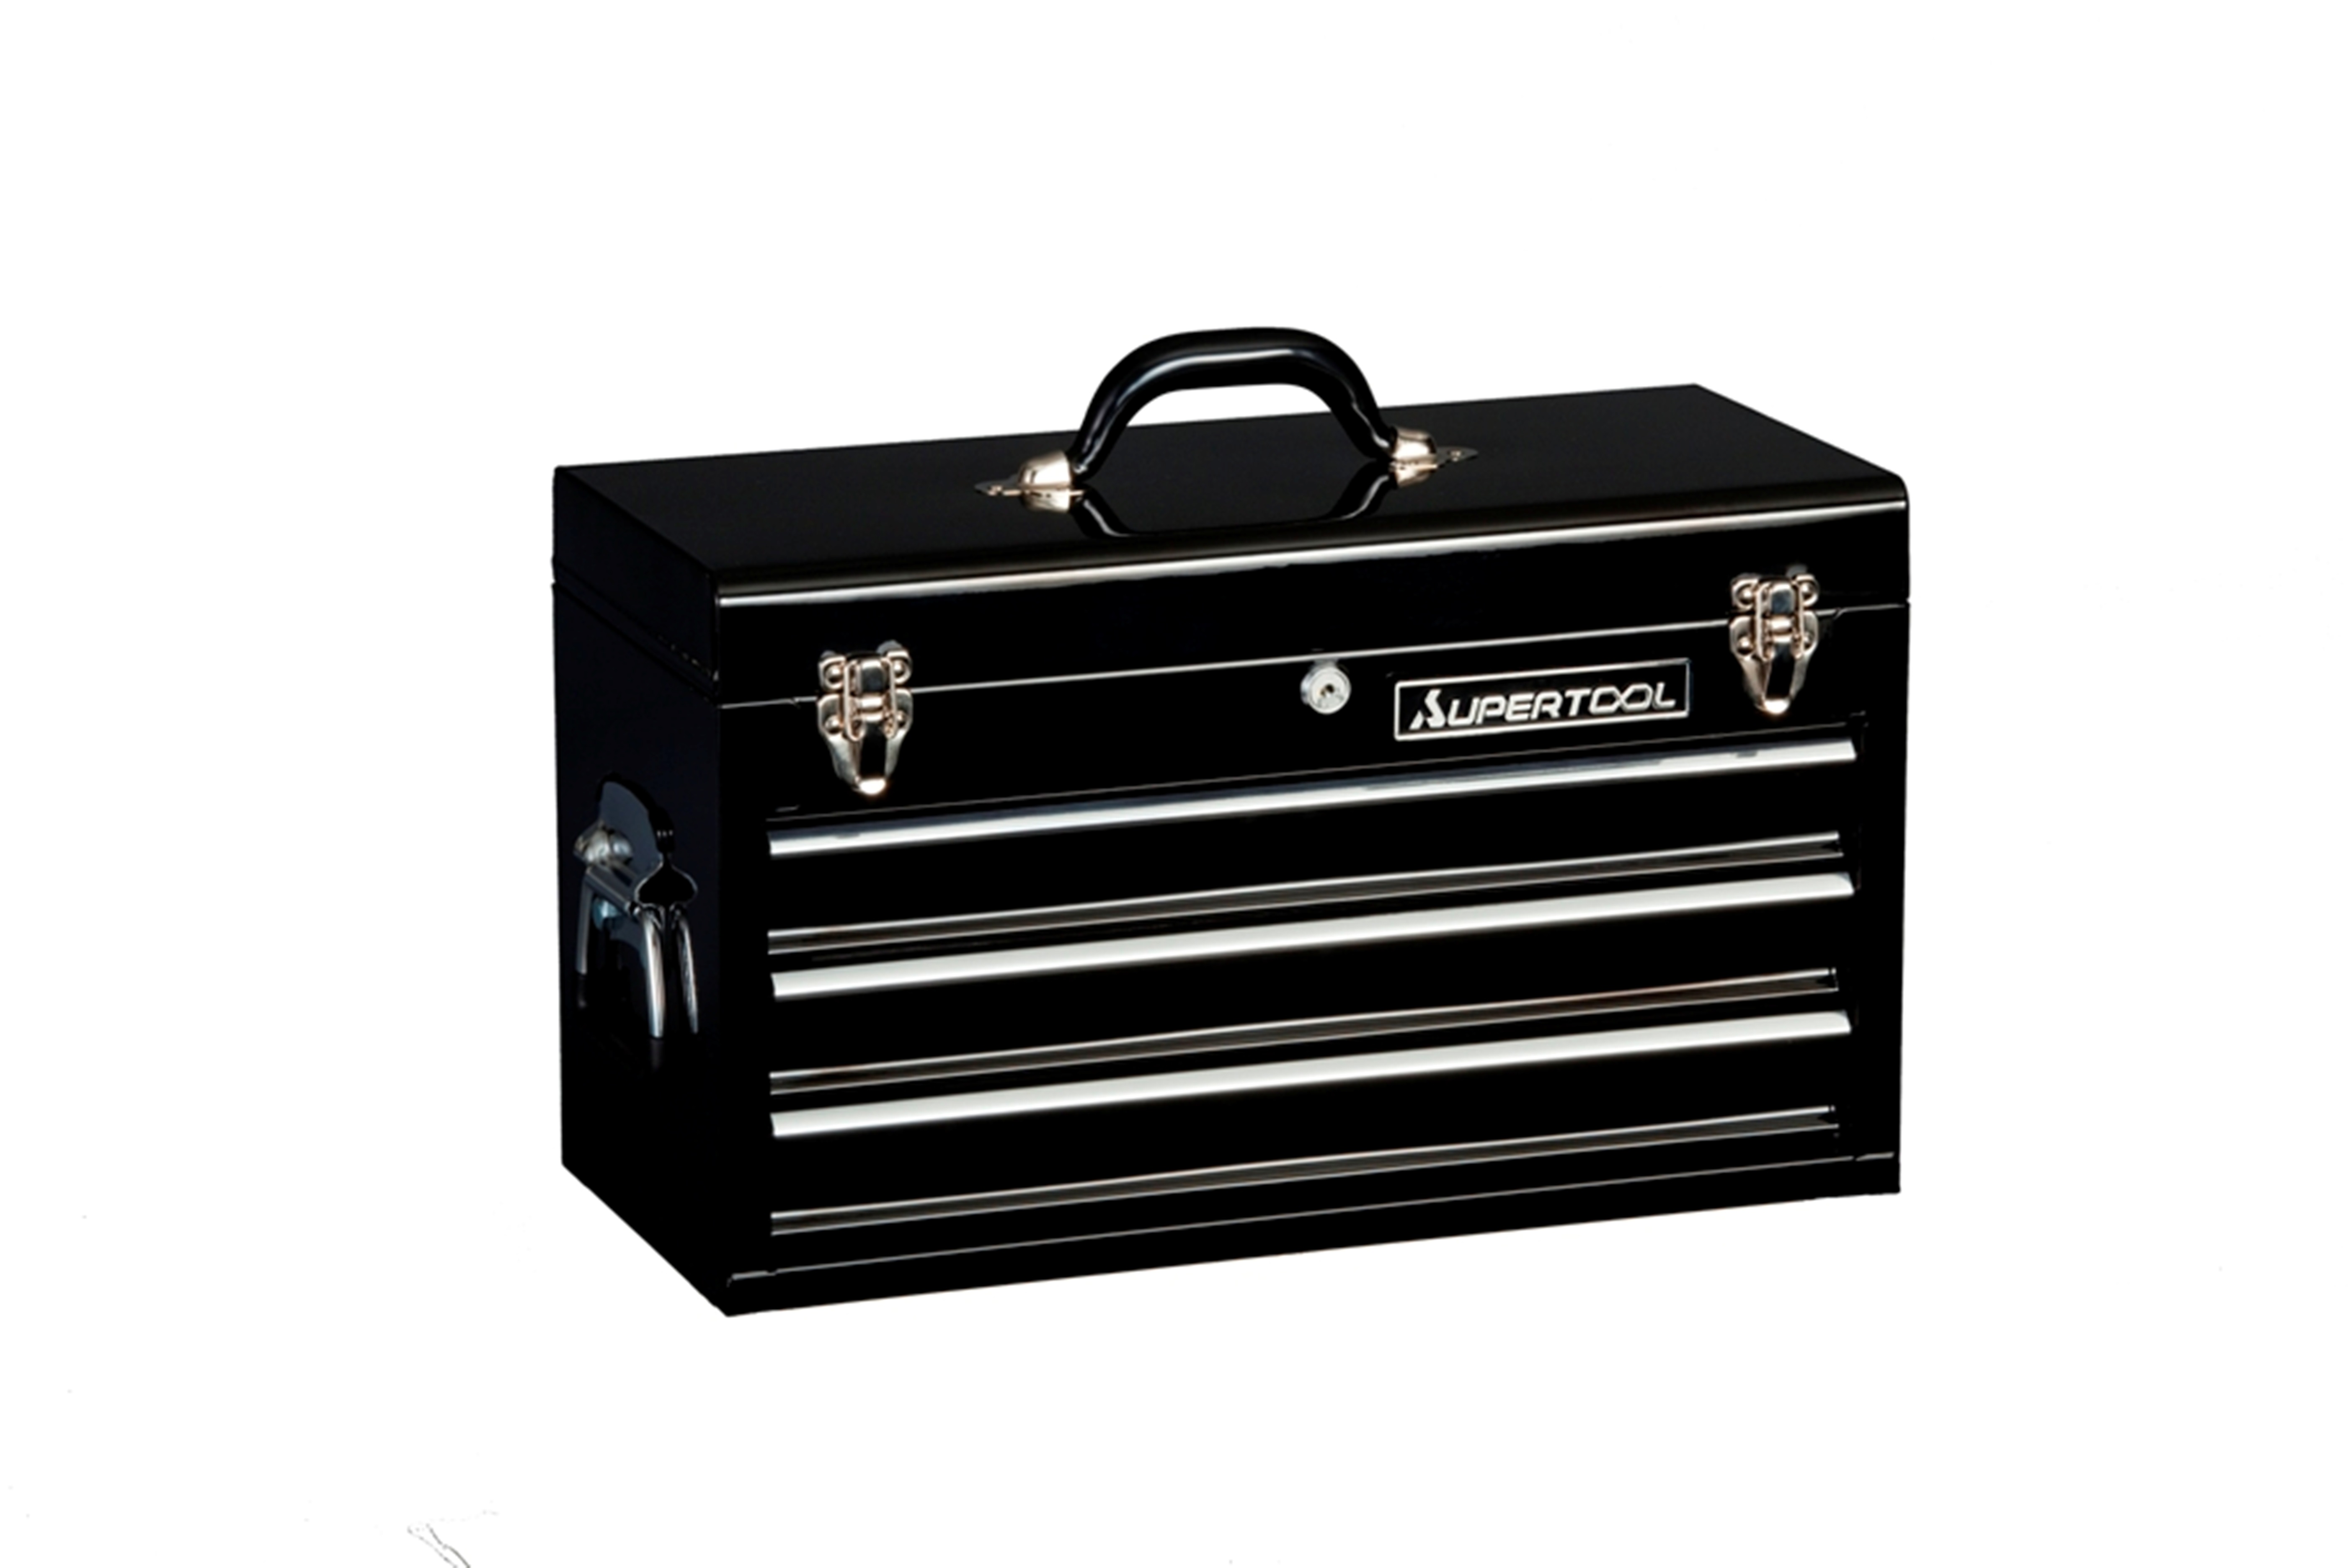 Tool Sets / Tool Boxes